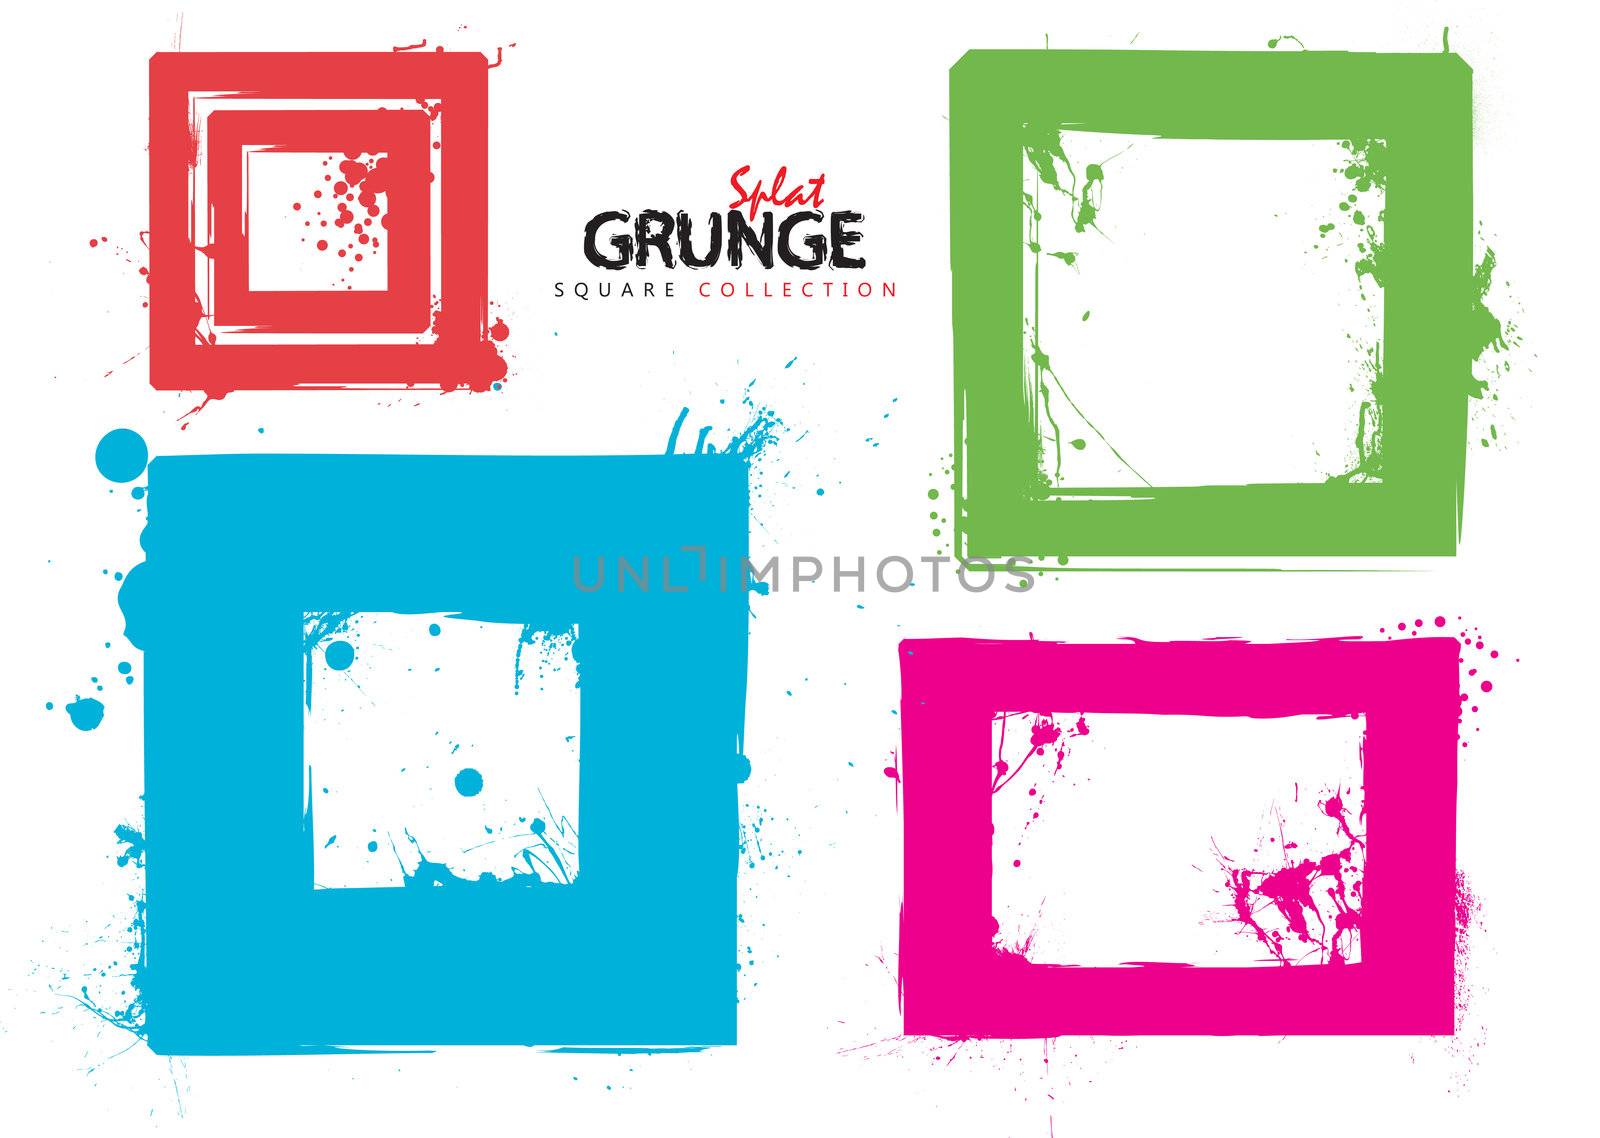 Grunge square collection ink by nicemonkey